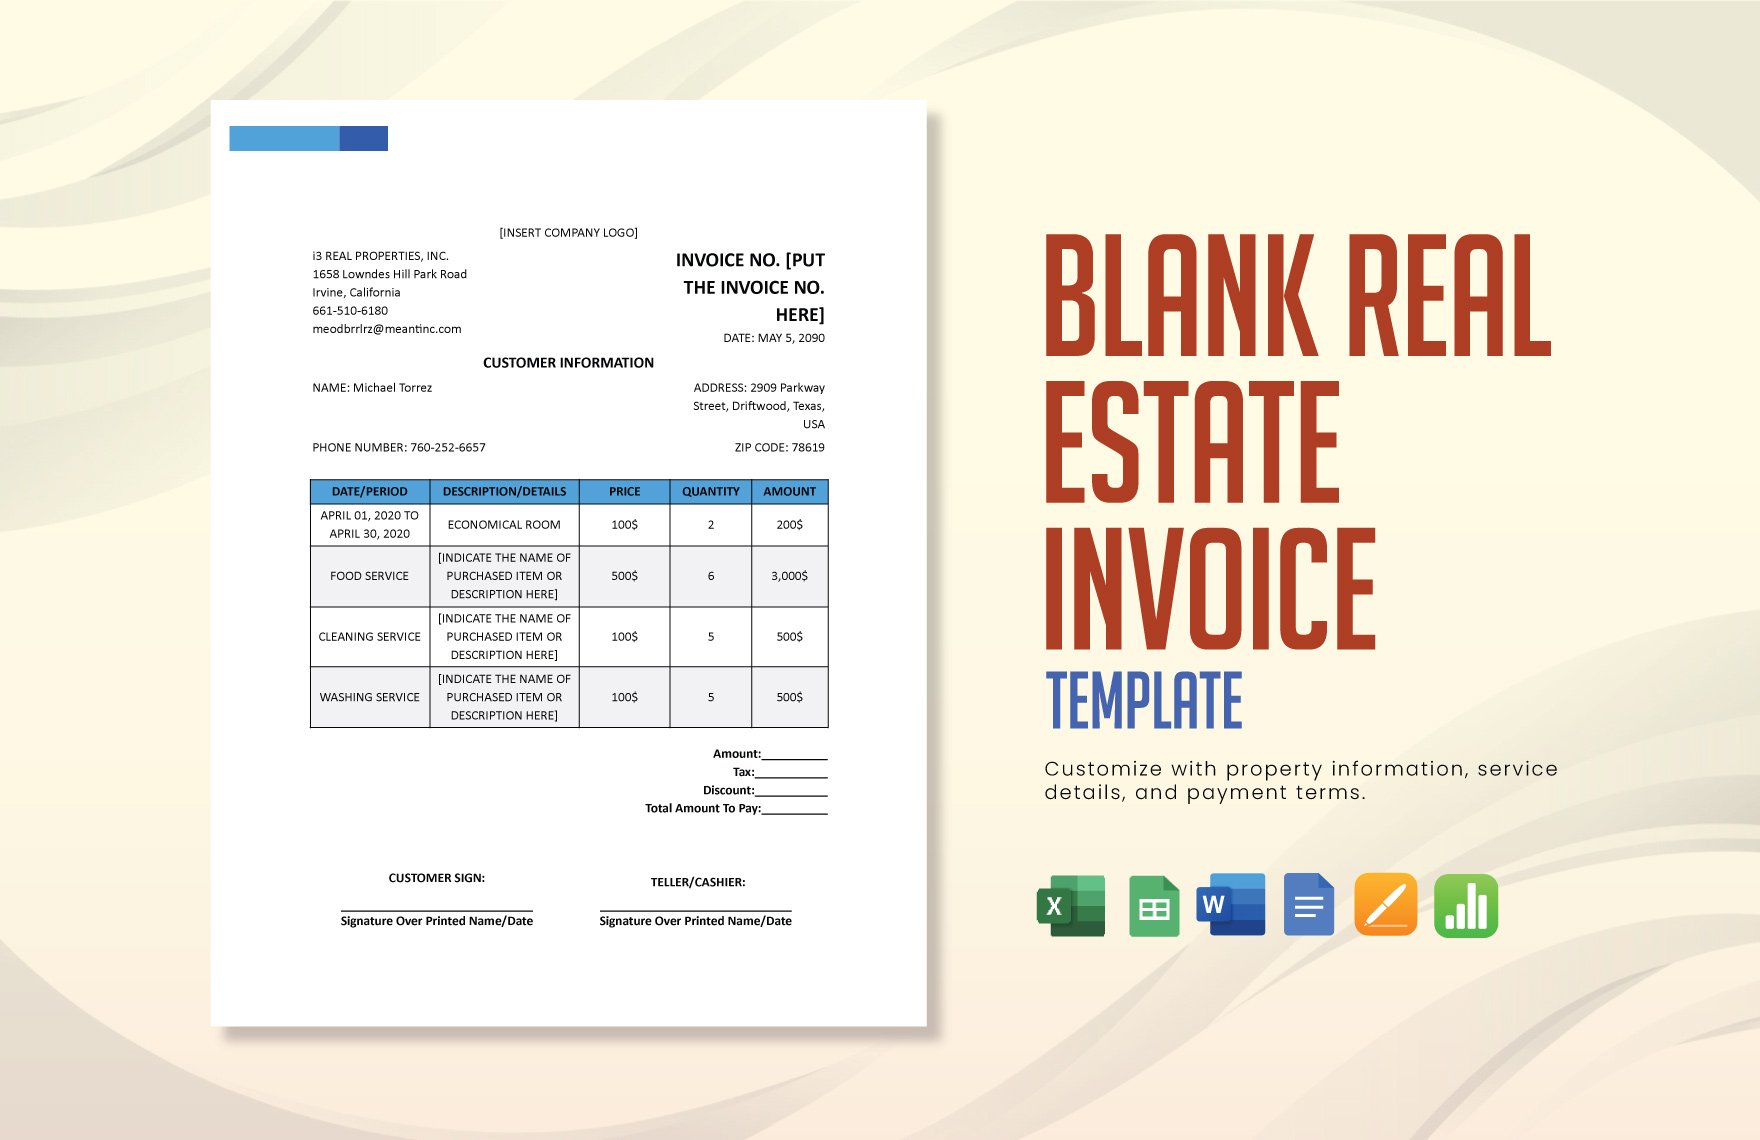 Blank Real Estate Invoice Template